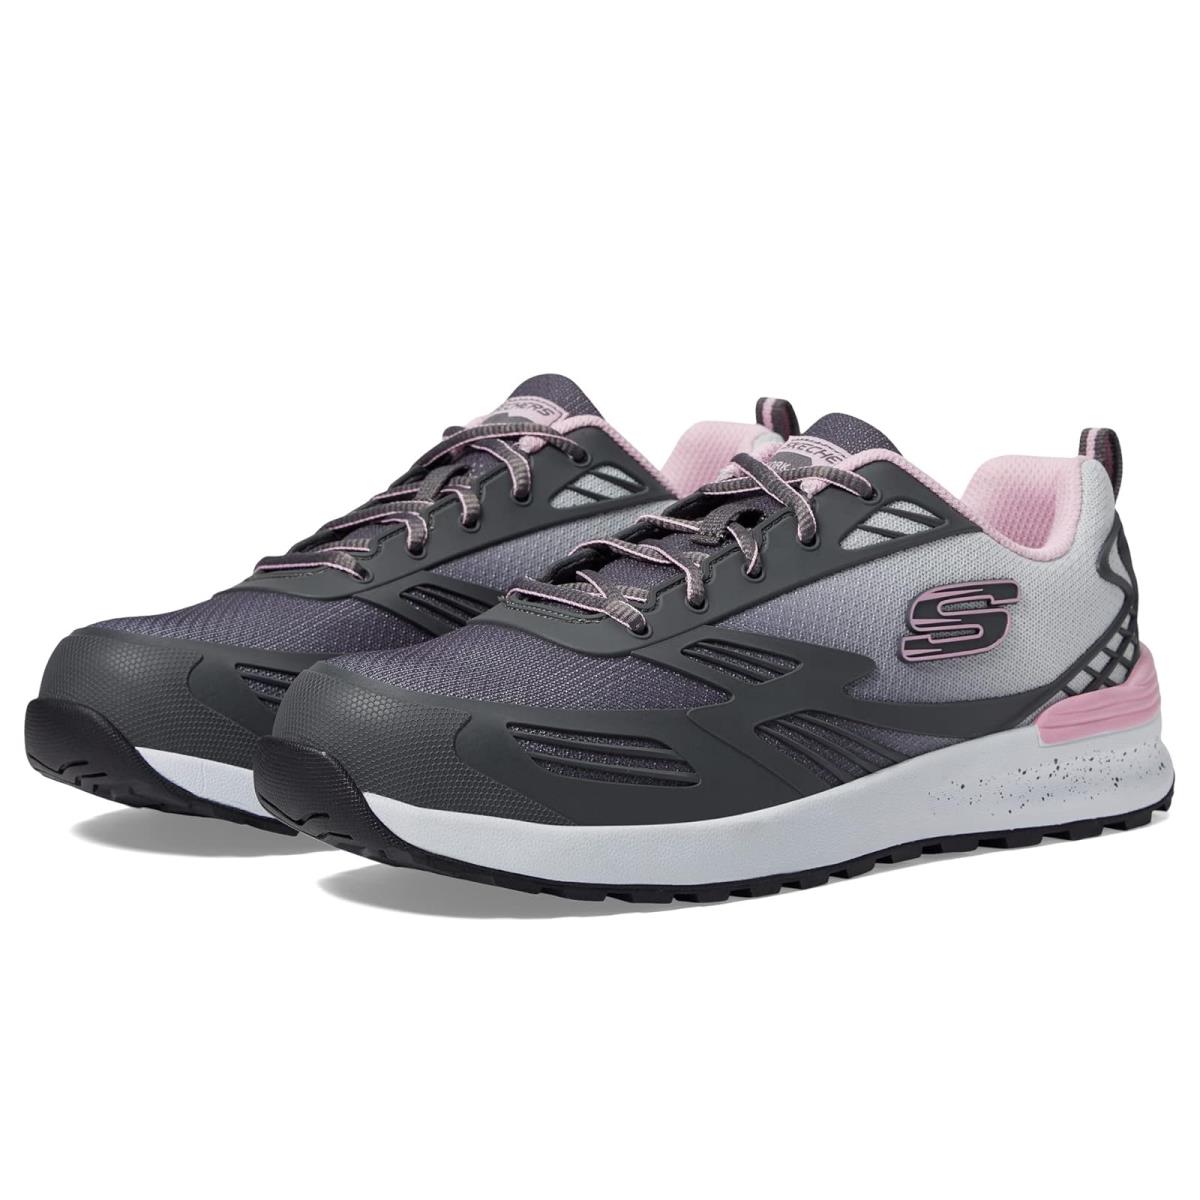 Woman`s Sneakers Athletic Shoes Skechers Work Bulklin - Kaytin Comp Toe Charcoal/Pink